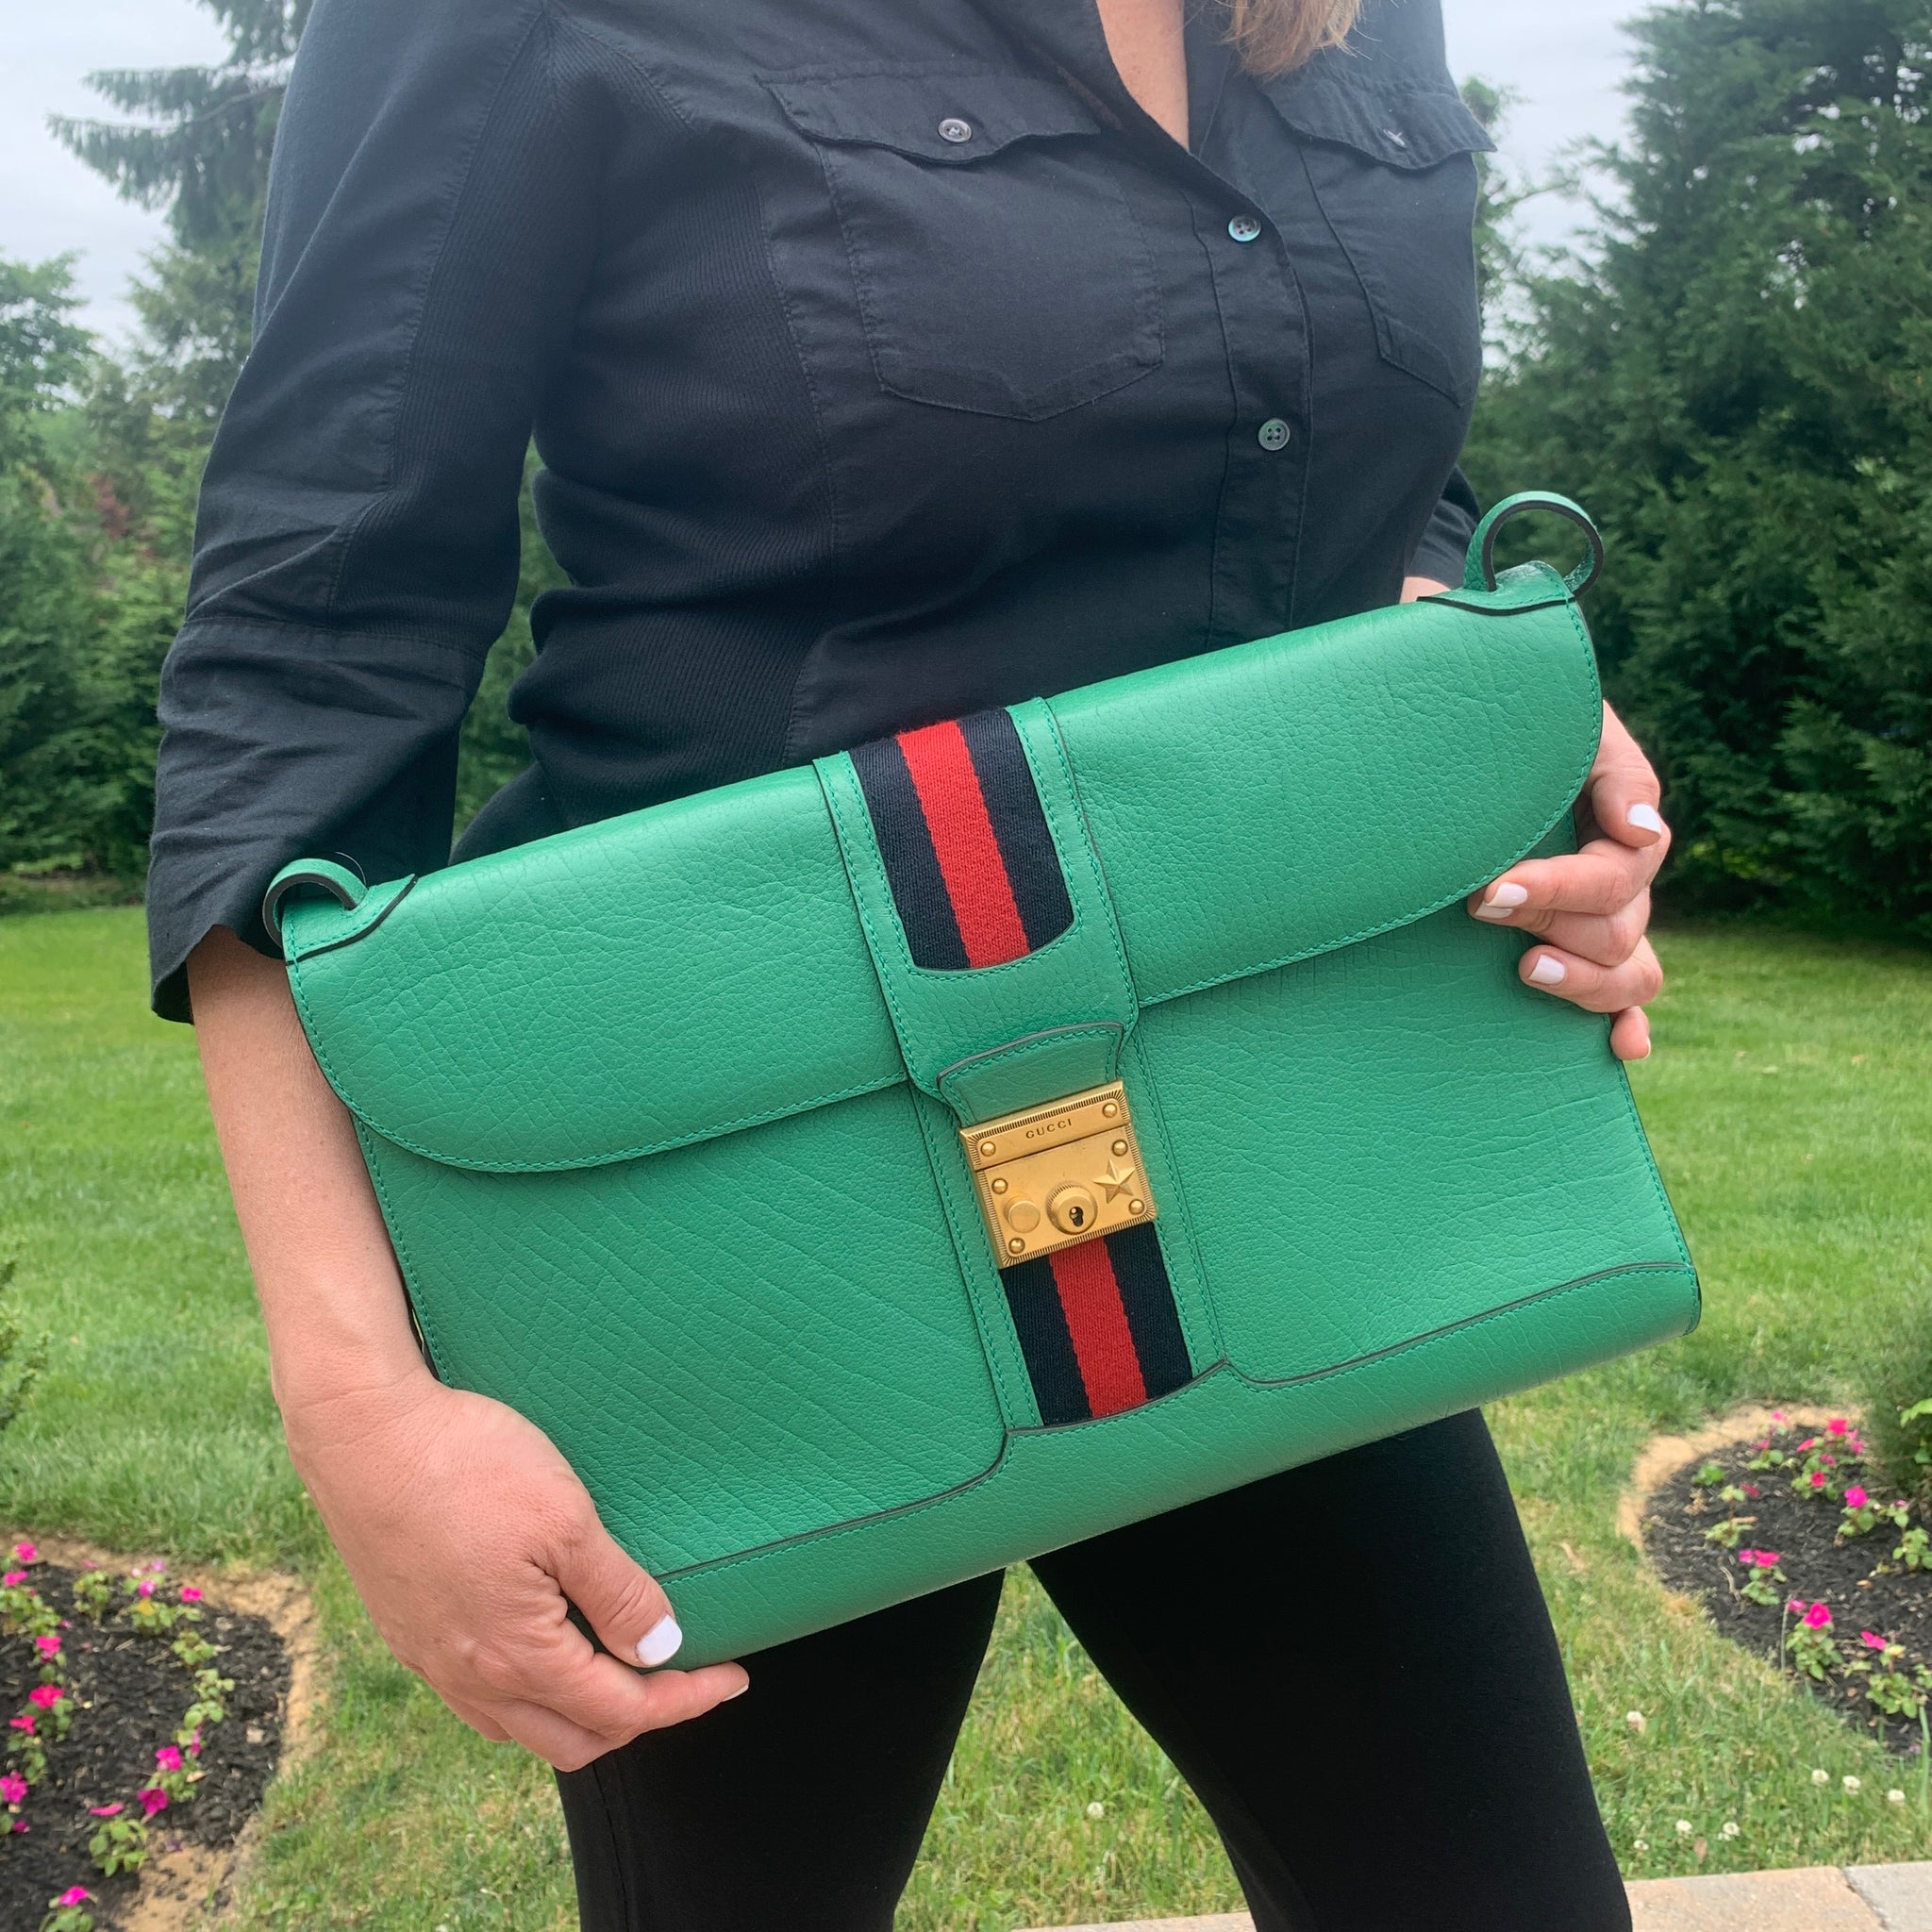 Gucci Oversize Guccissima Green Leather Jackie Bag